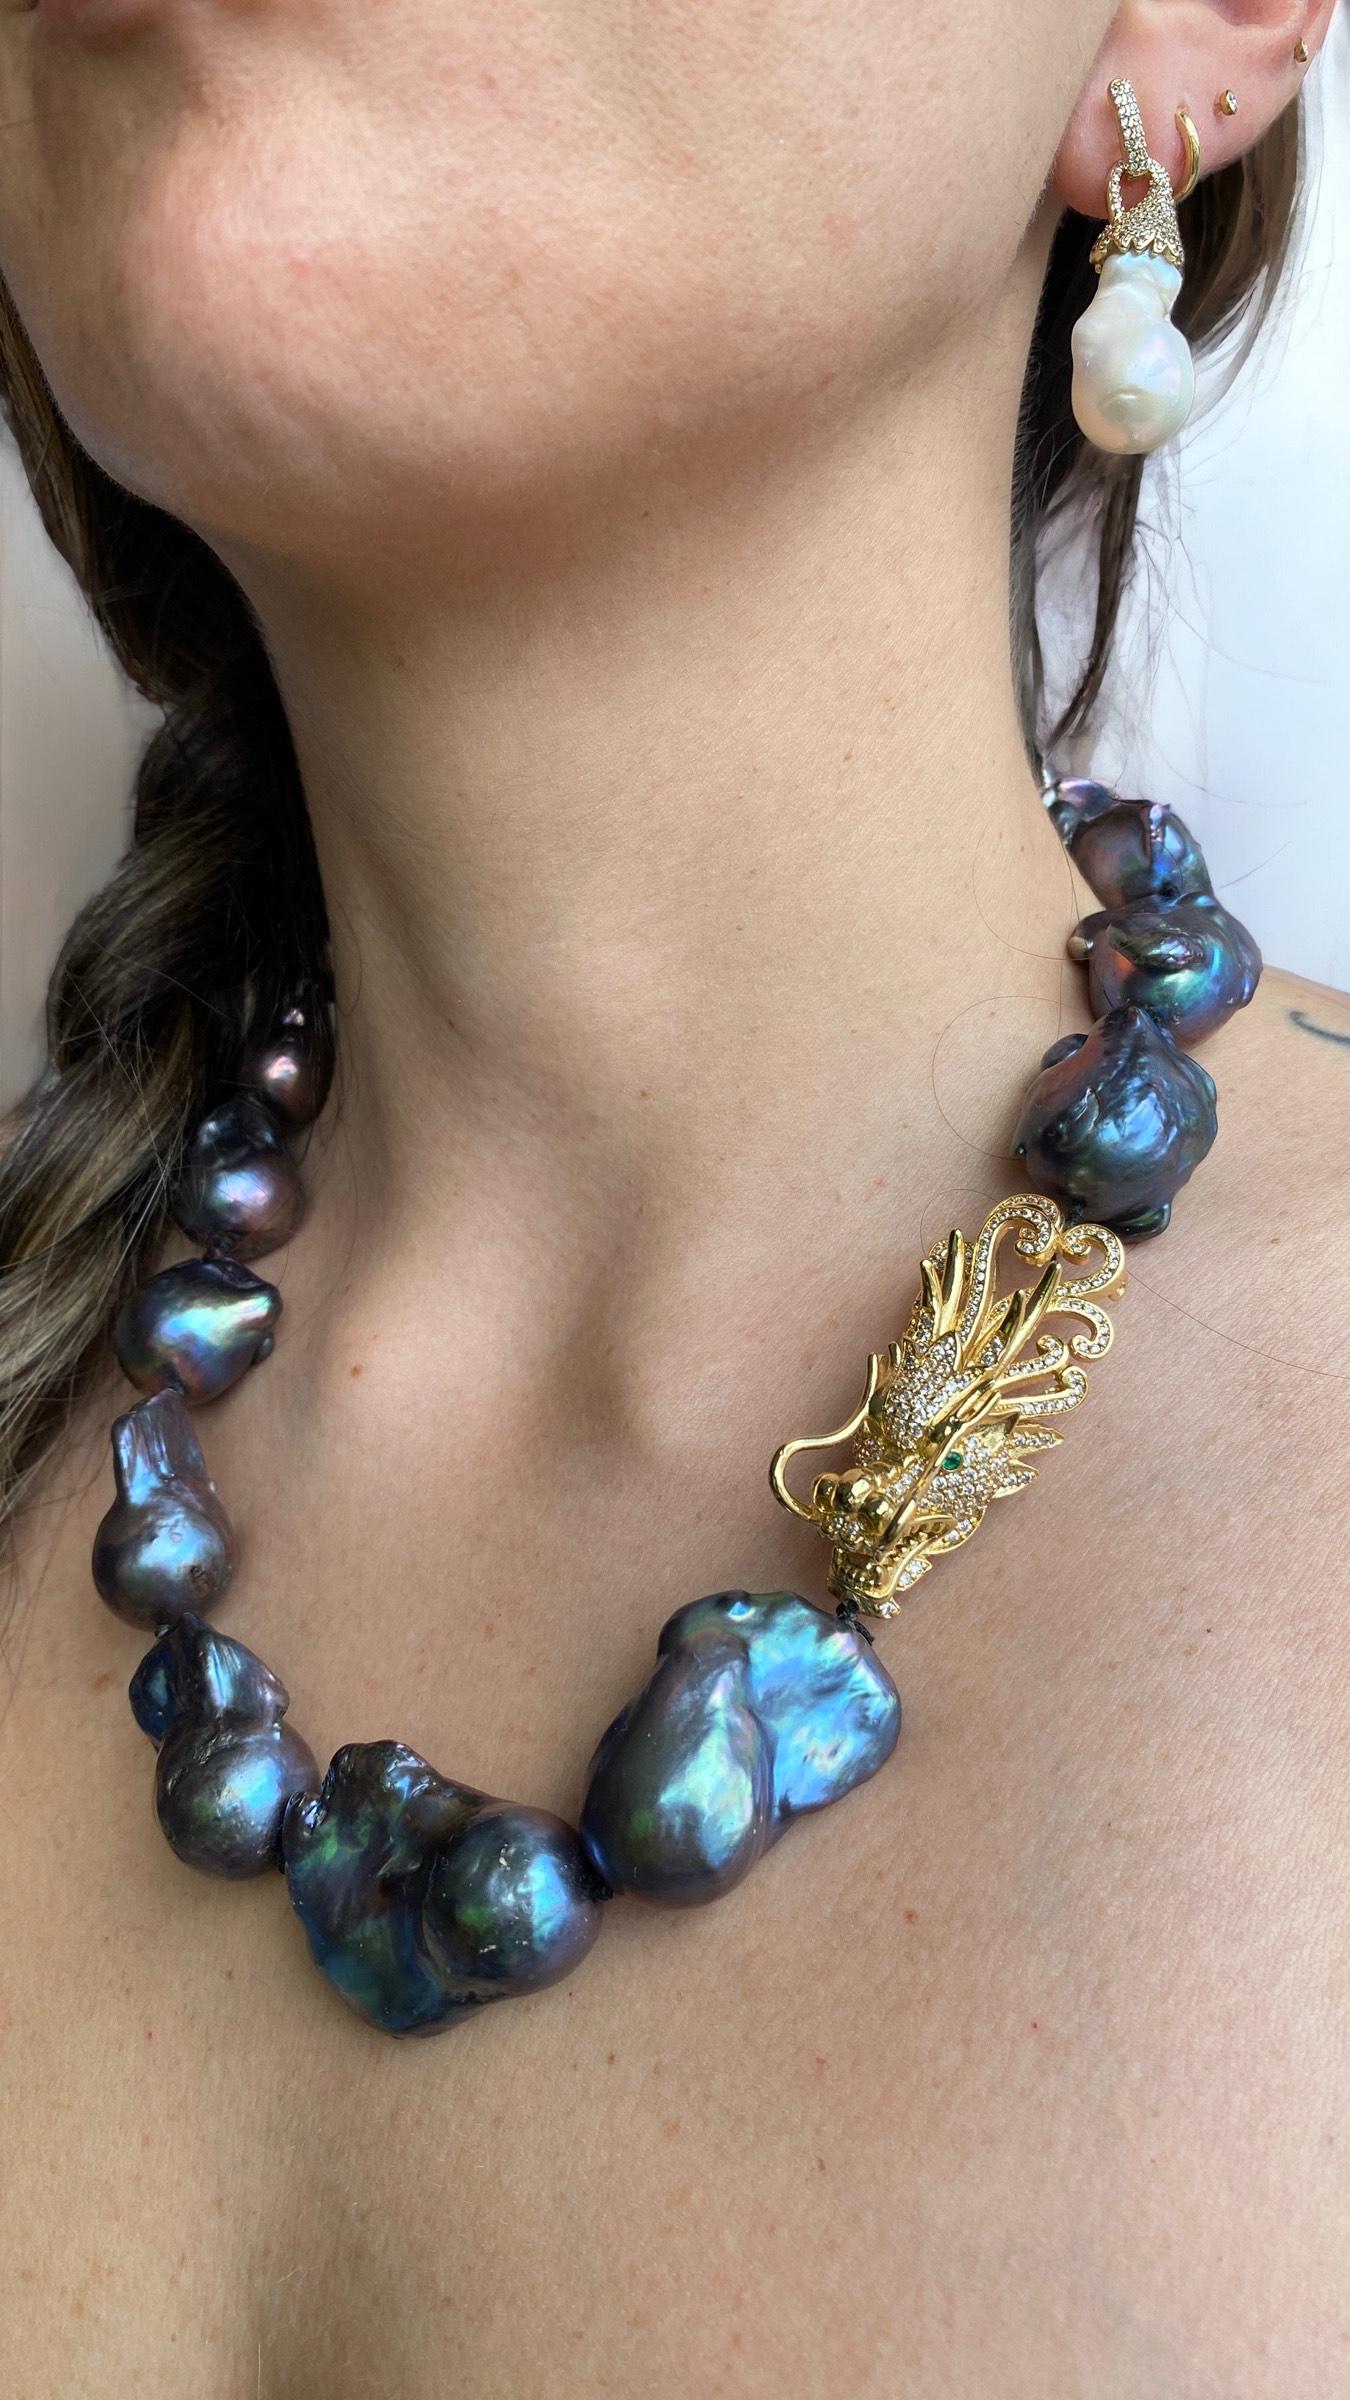 This unique piece by Sebastian Jaramillo features stunning peacock toned cultured baroque pearls, delicately calibrated and feature a golden dragon head set in micro crystals and deep emerald colored eyes. This elegant yet edgy necklace and the deep